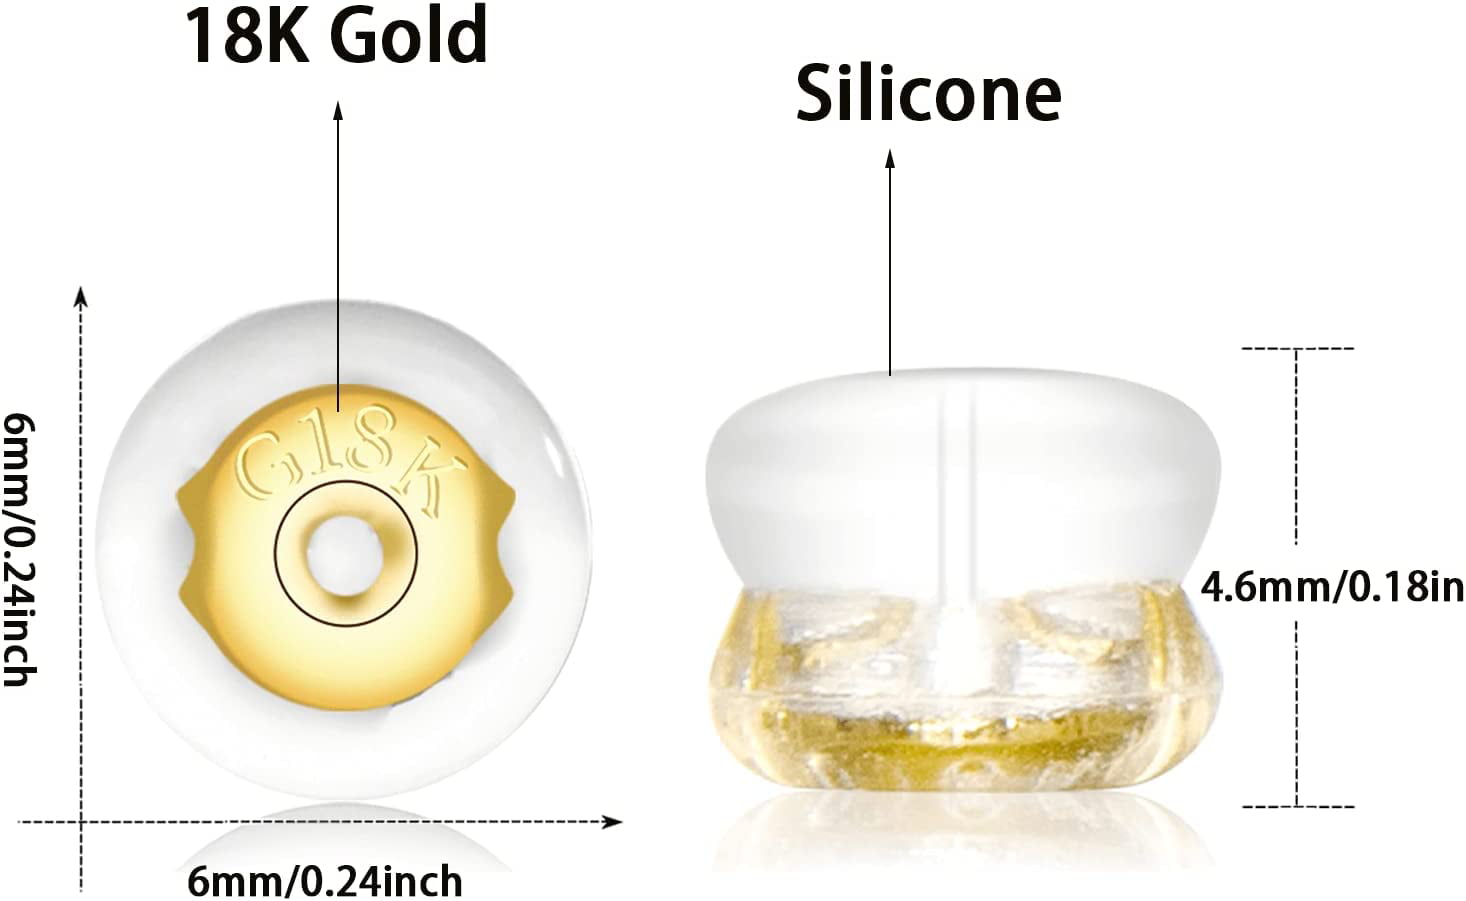 Locking Earring Backs for Studs,18k Gold Silicone Earrings Back for Studs  Secure,Hypoallergenic Earring Backs Apply to Earring Backs for Droopy Ears